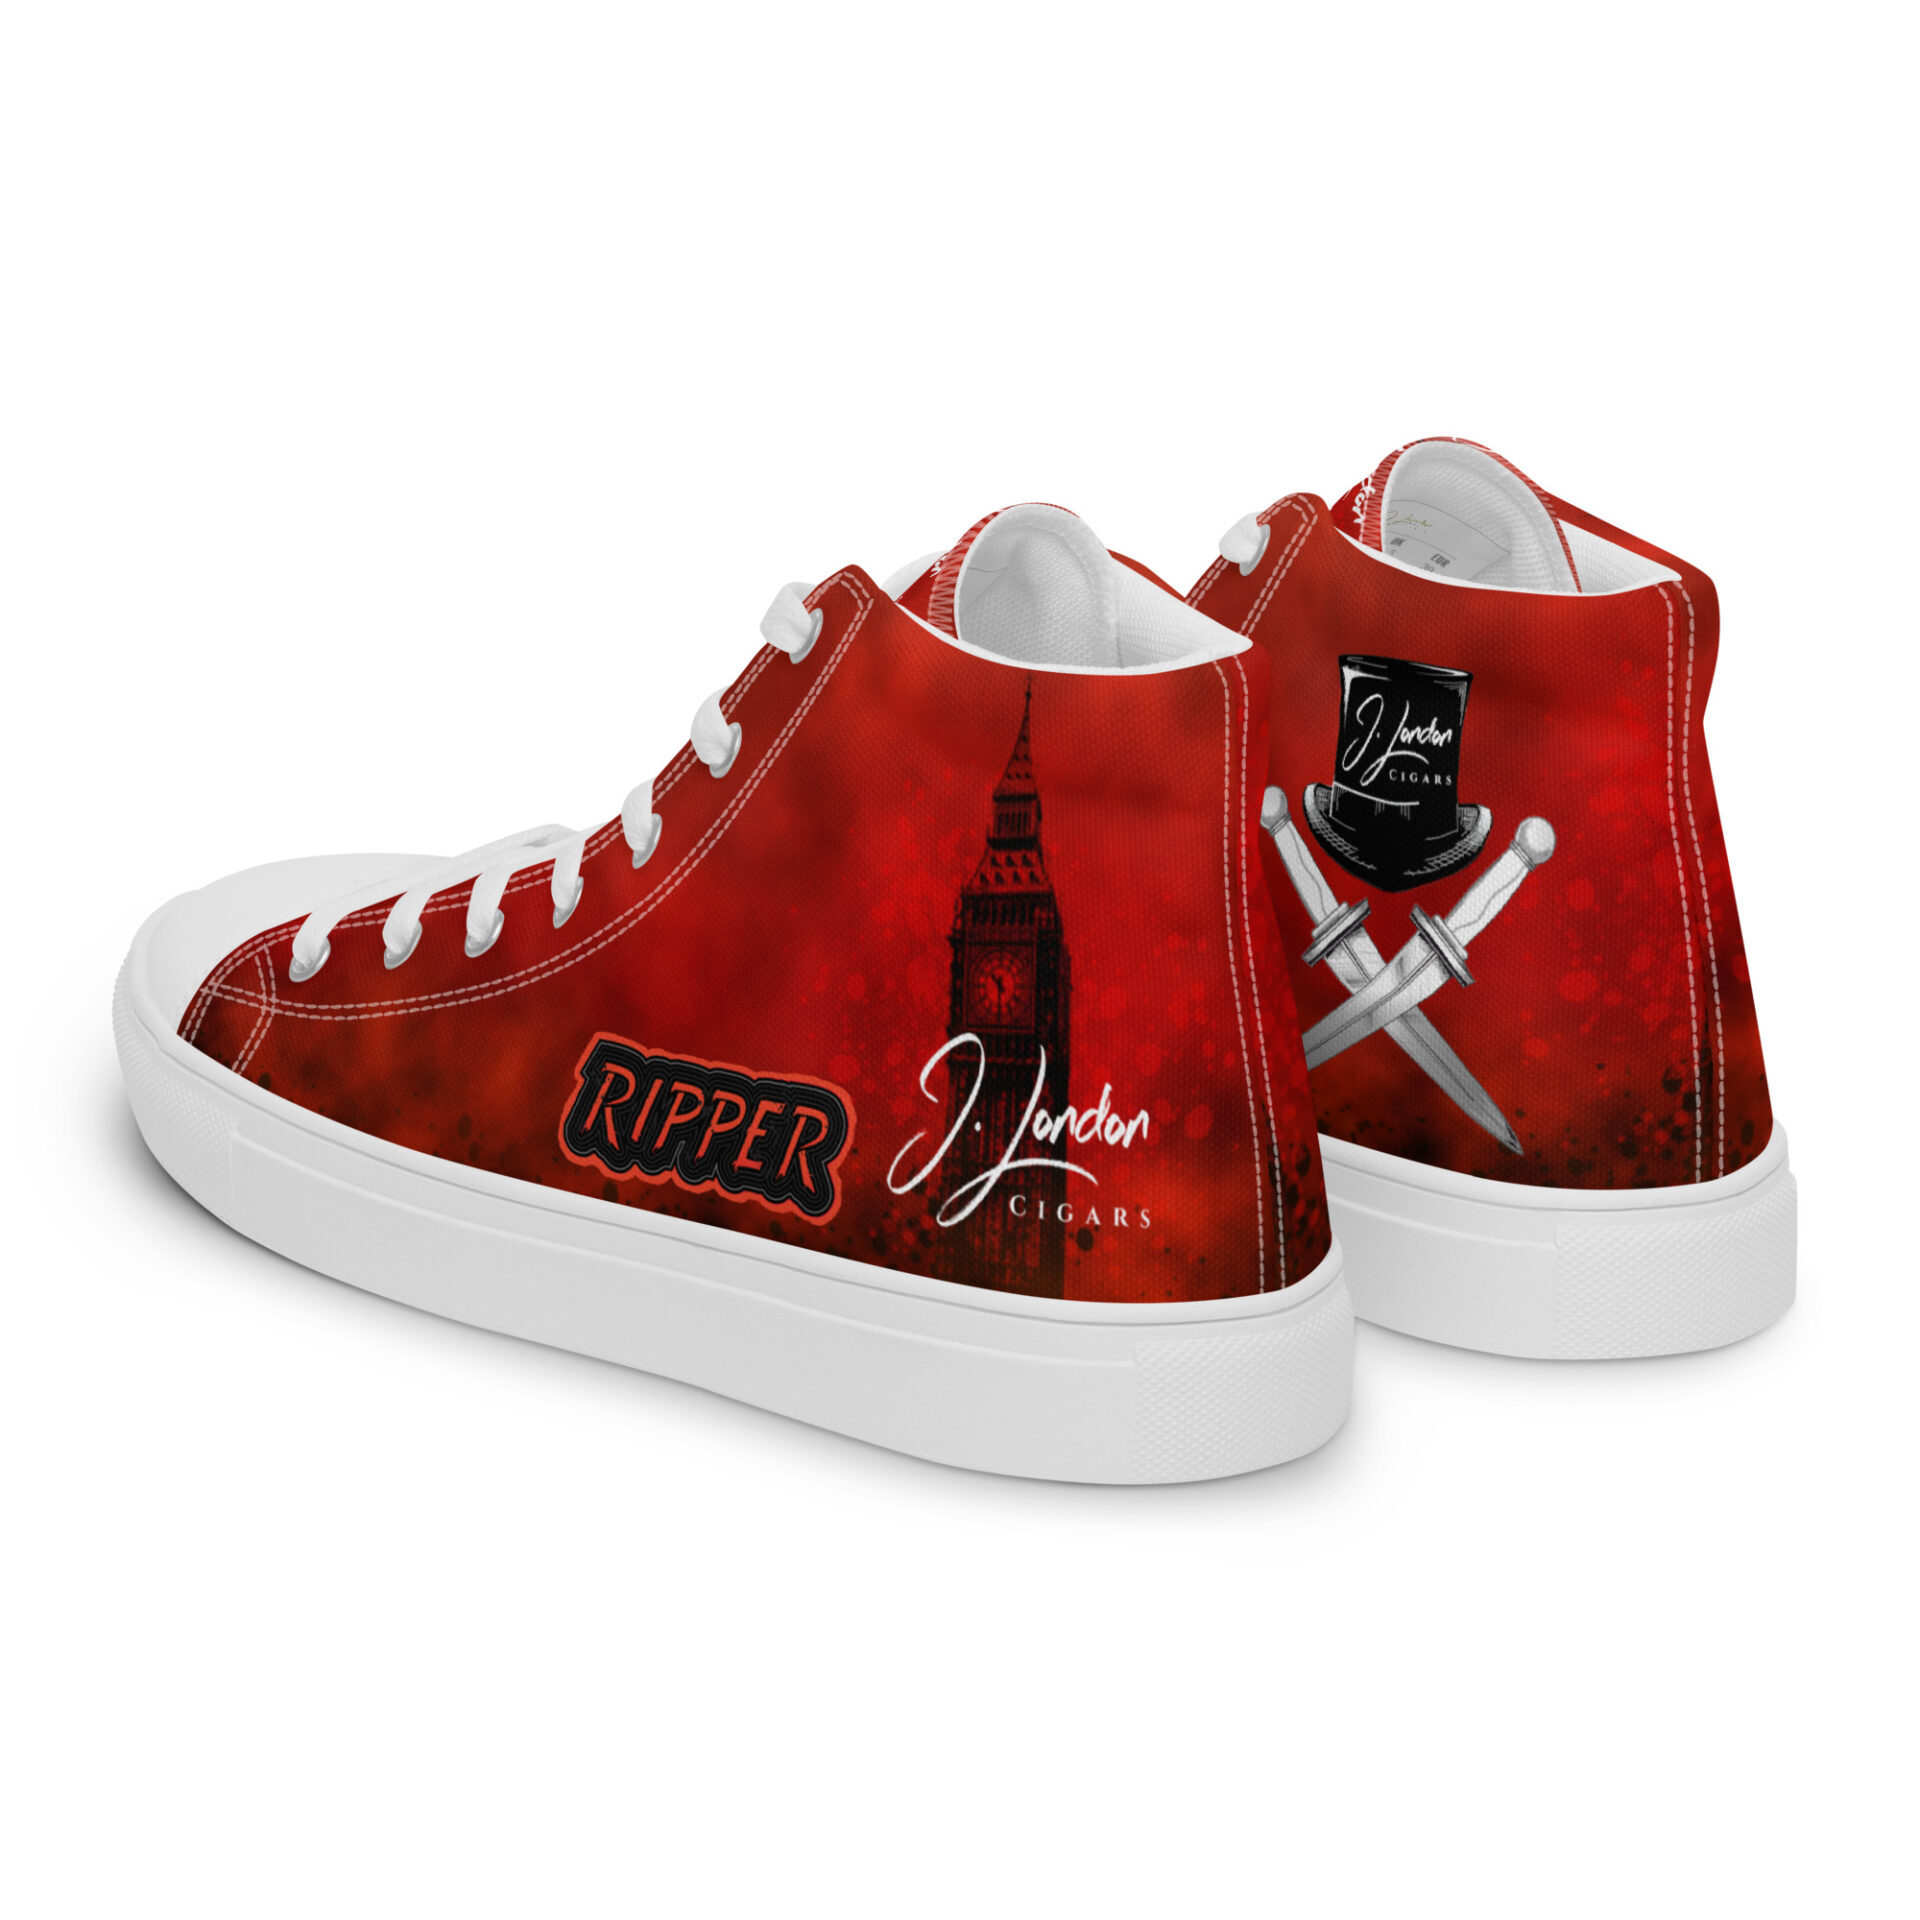 The Ripper Canvas High Top Sneakers - J. London Brands